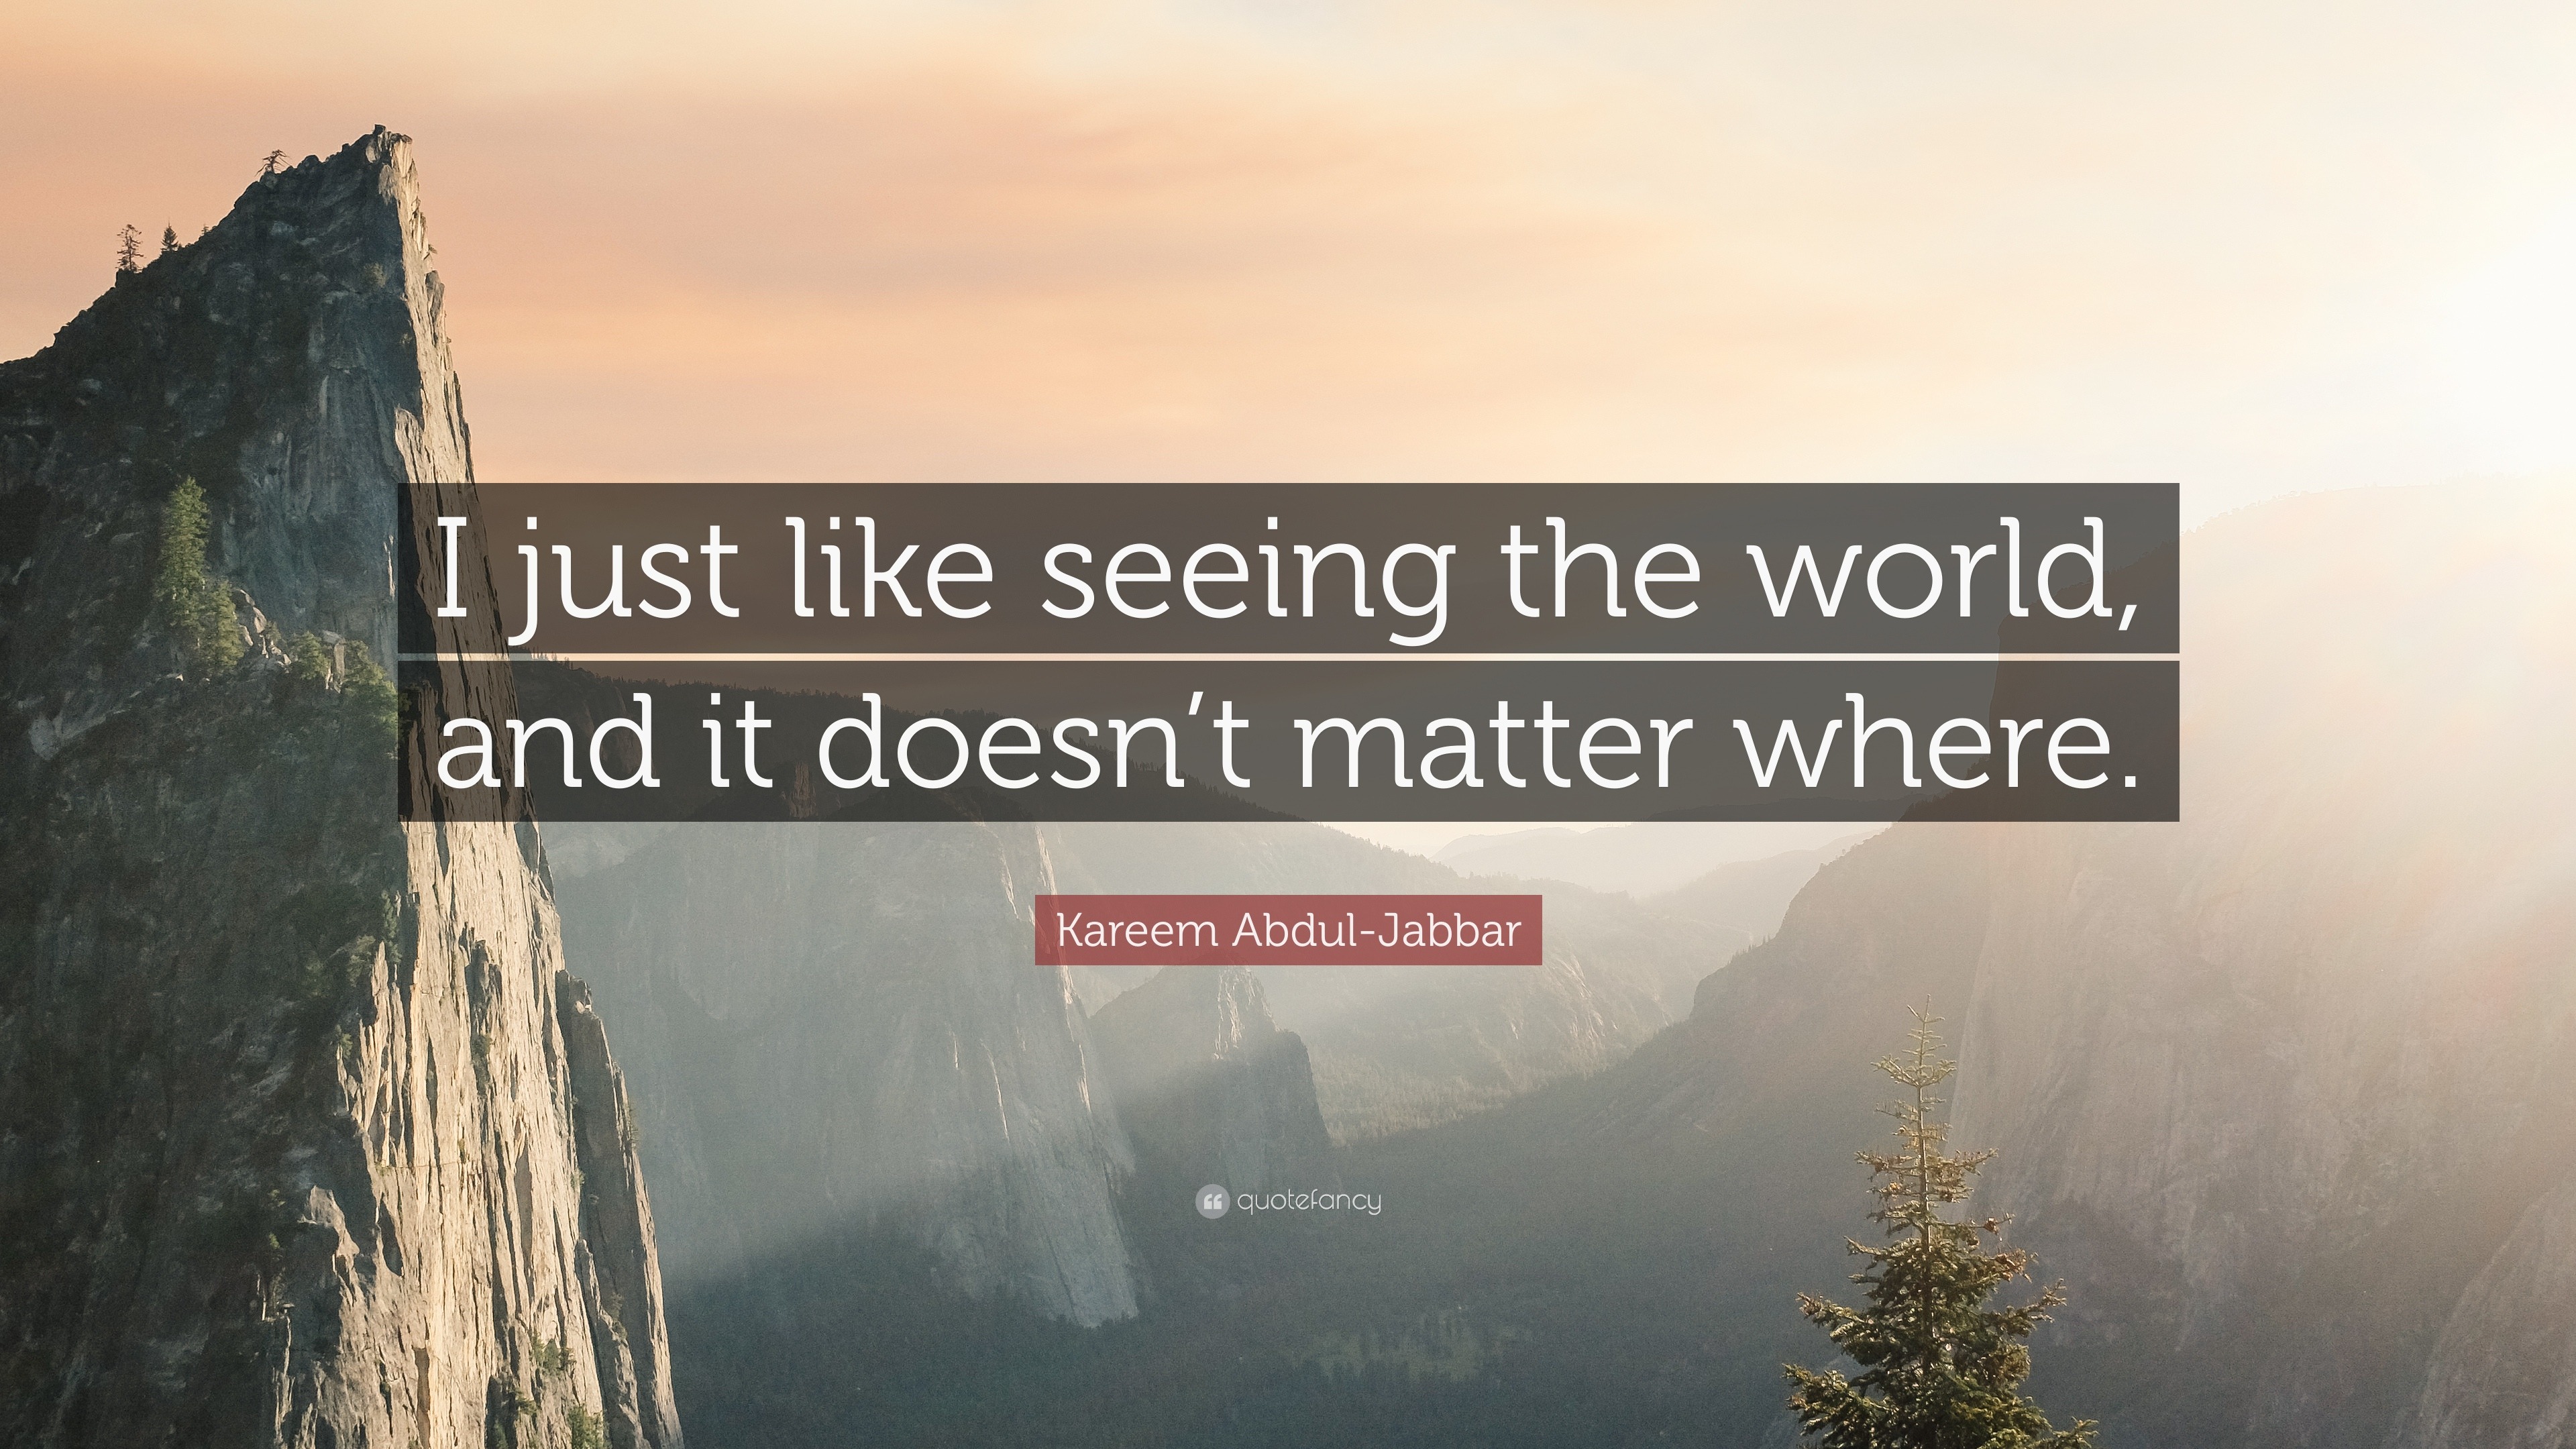 Kareem Abdul Jabbar Quote “i Just Like Seeing The World And It Doesn